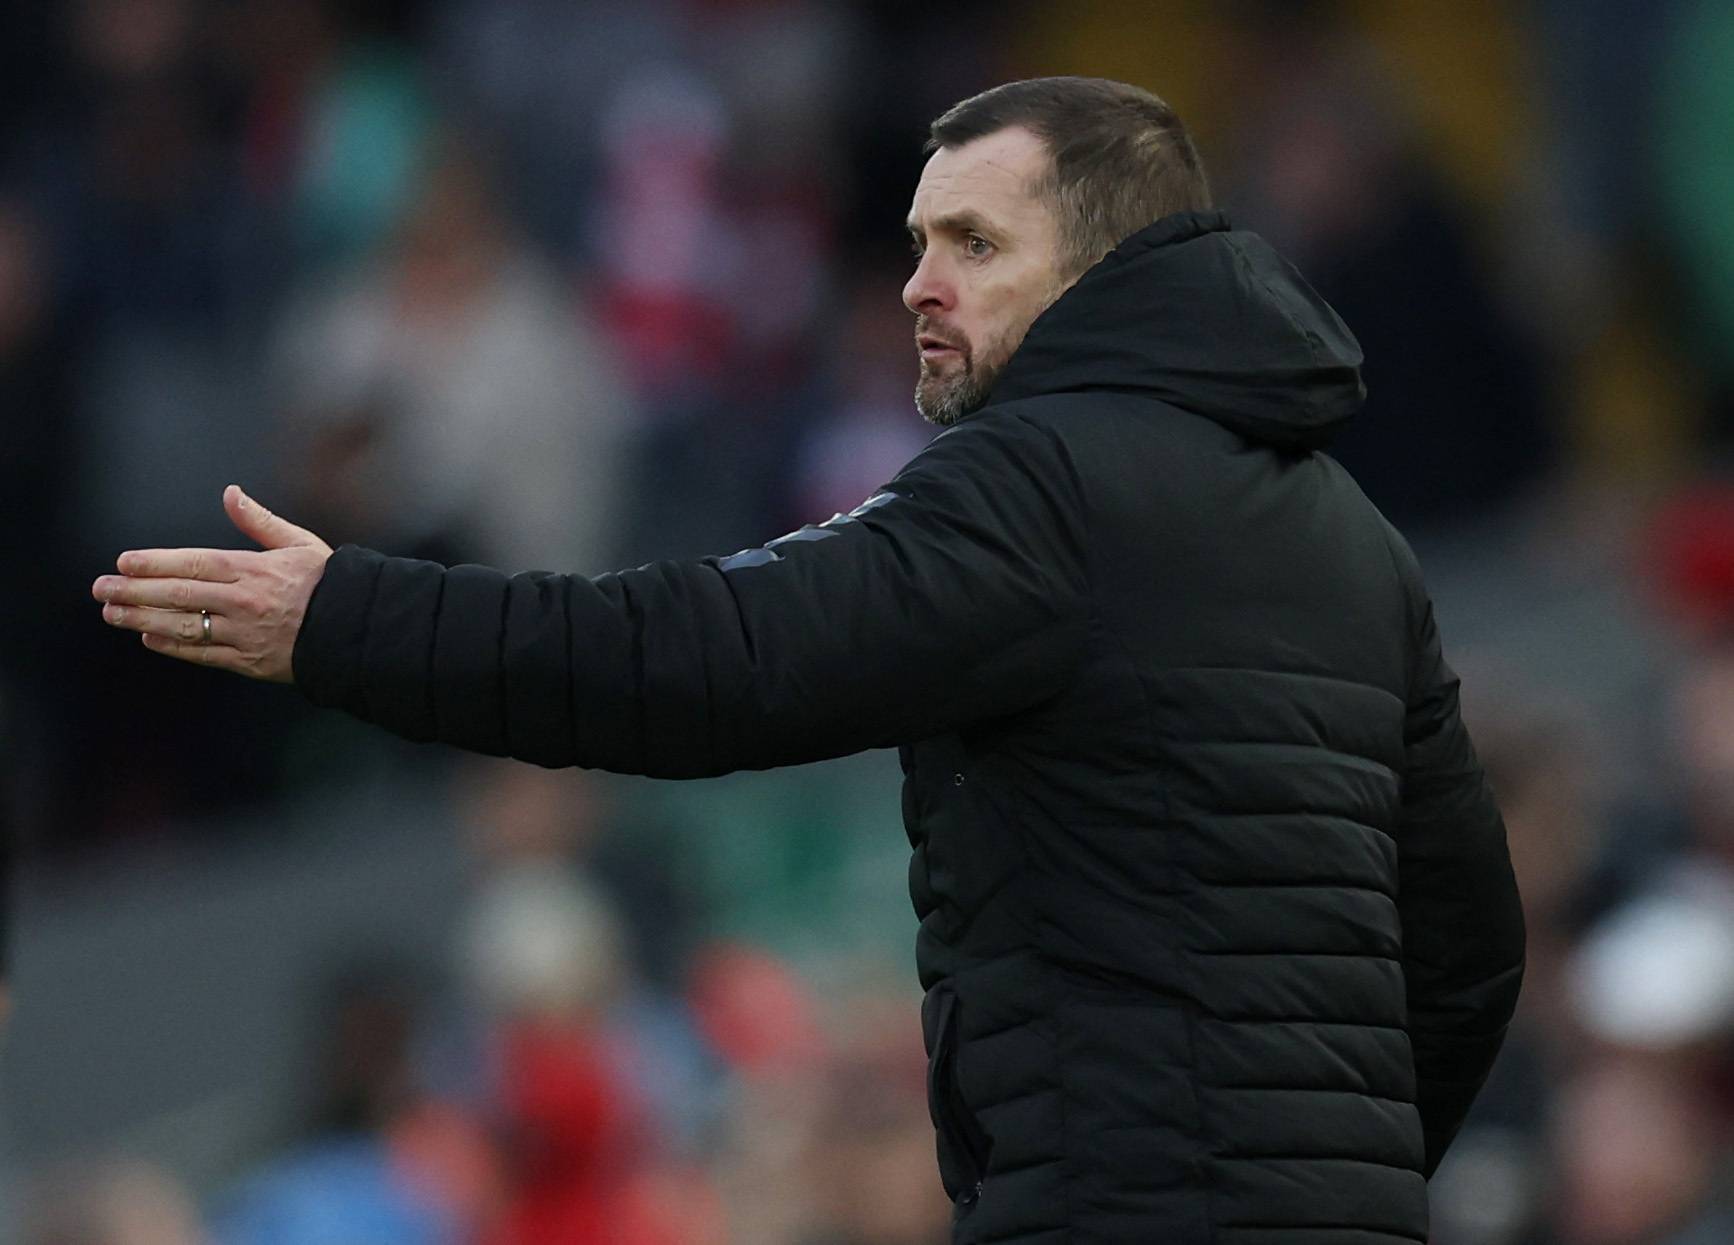 Southampton manager Nathan Jones pointing during Premier League match